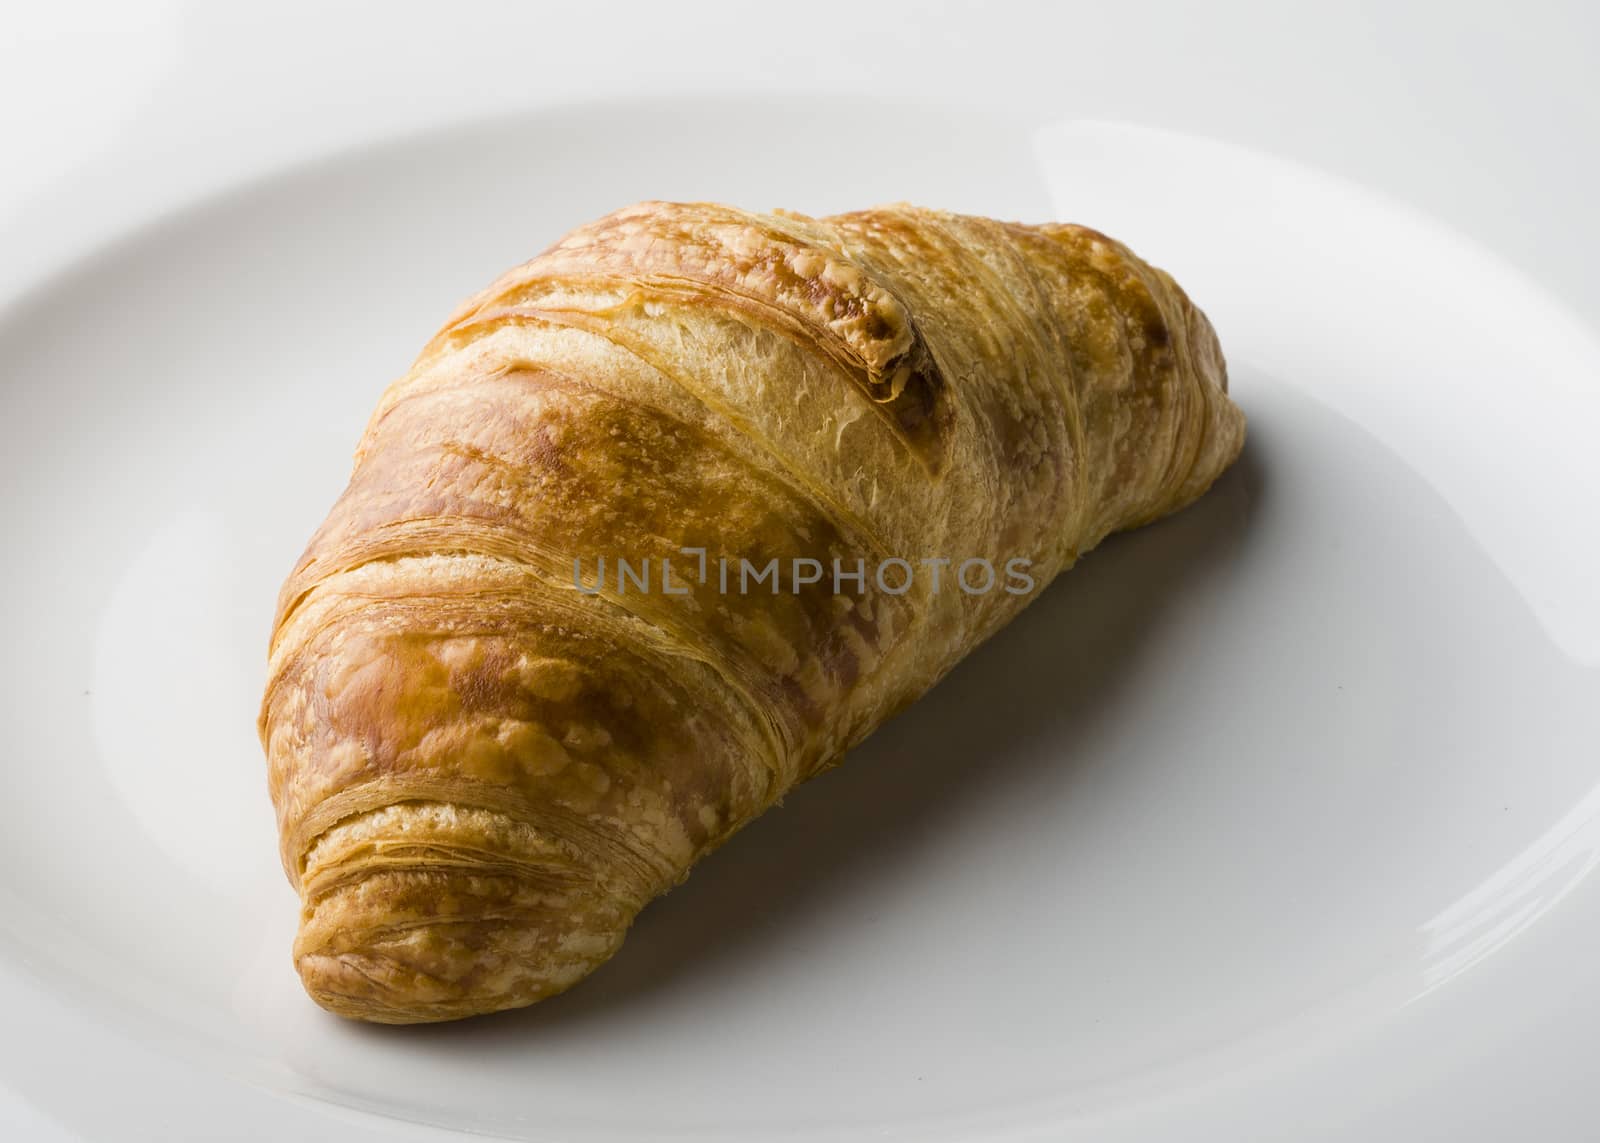 Croissant served on a white porcelain plate by vladiczech